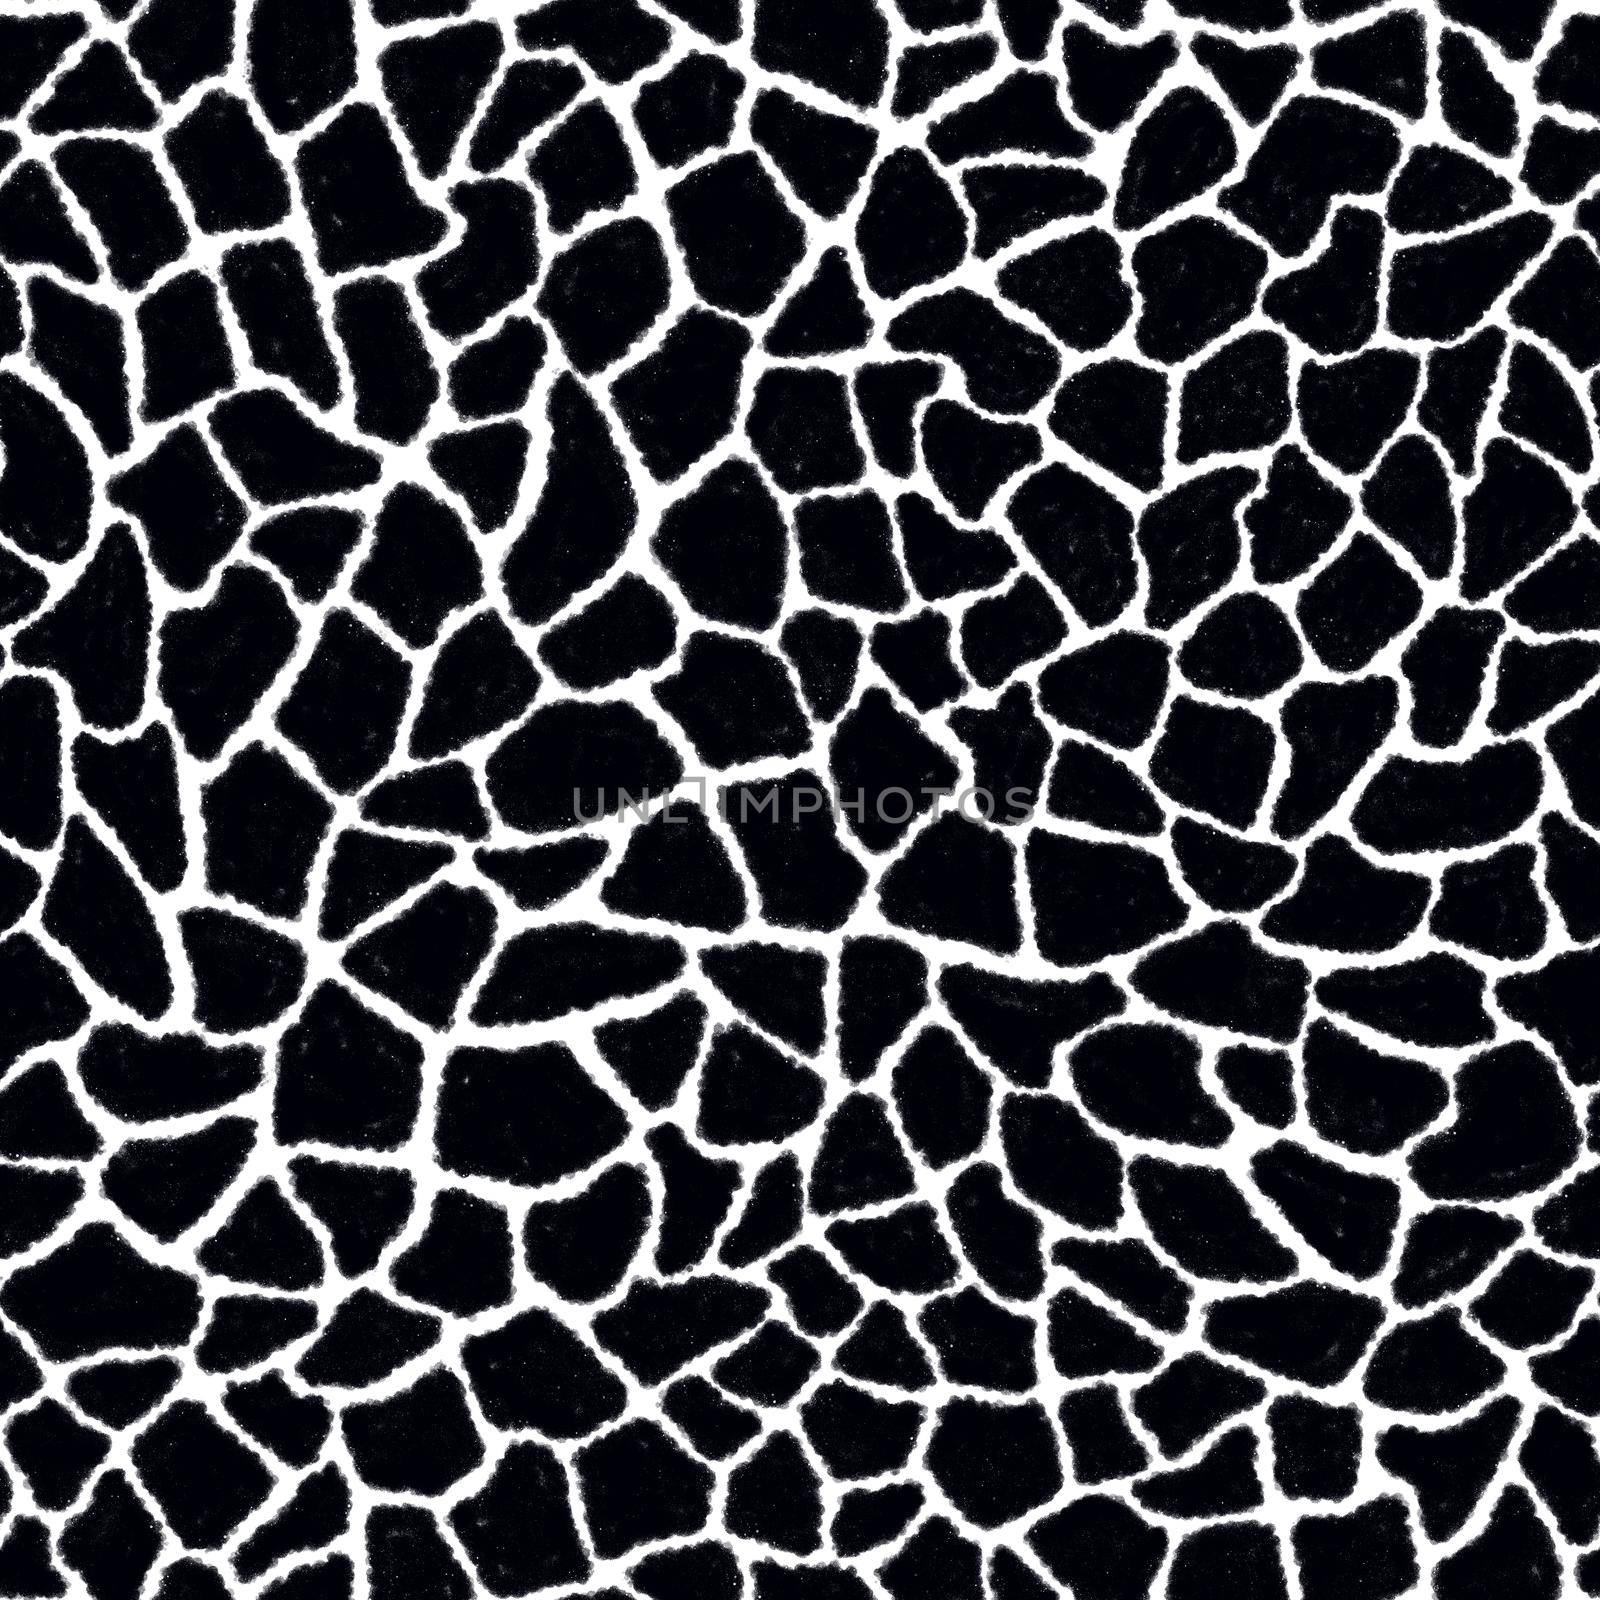 Giraffe skin color seamless pattern with fashion animal print for continuous replicate. Chaotic mosaic black pieces on white background. Wrapping paper, funny textile fabric print,design,decor.